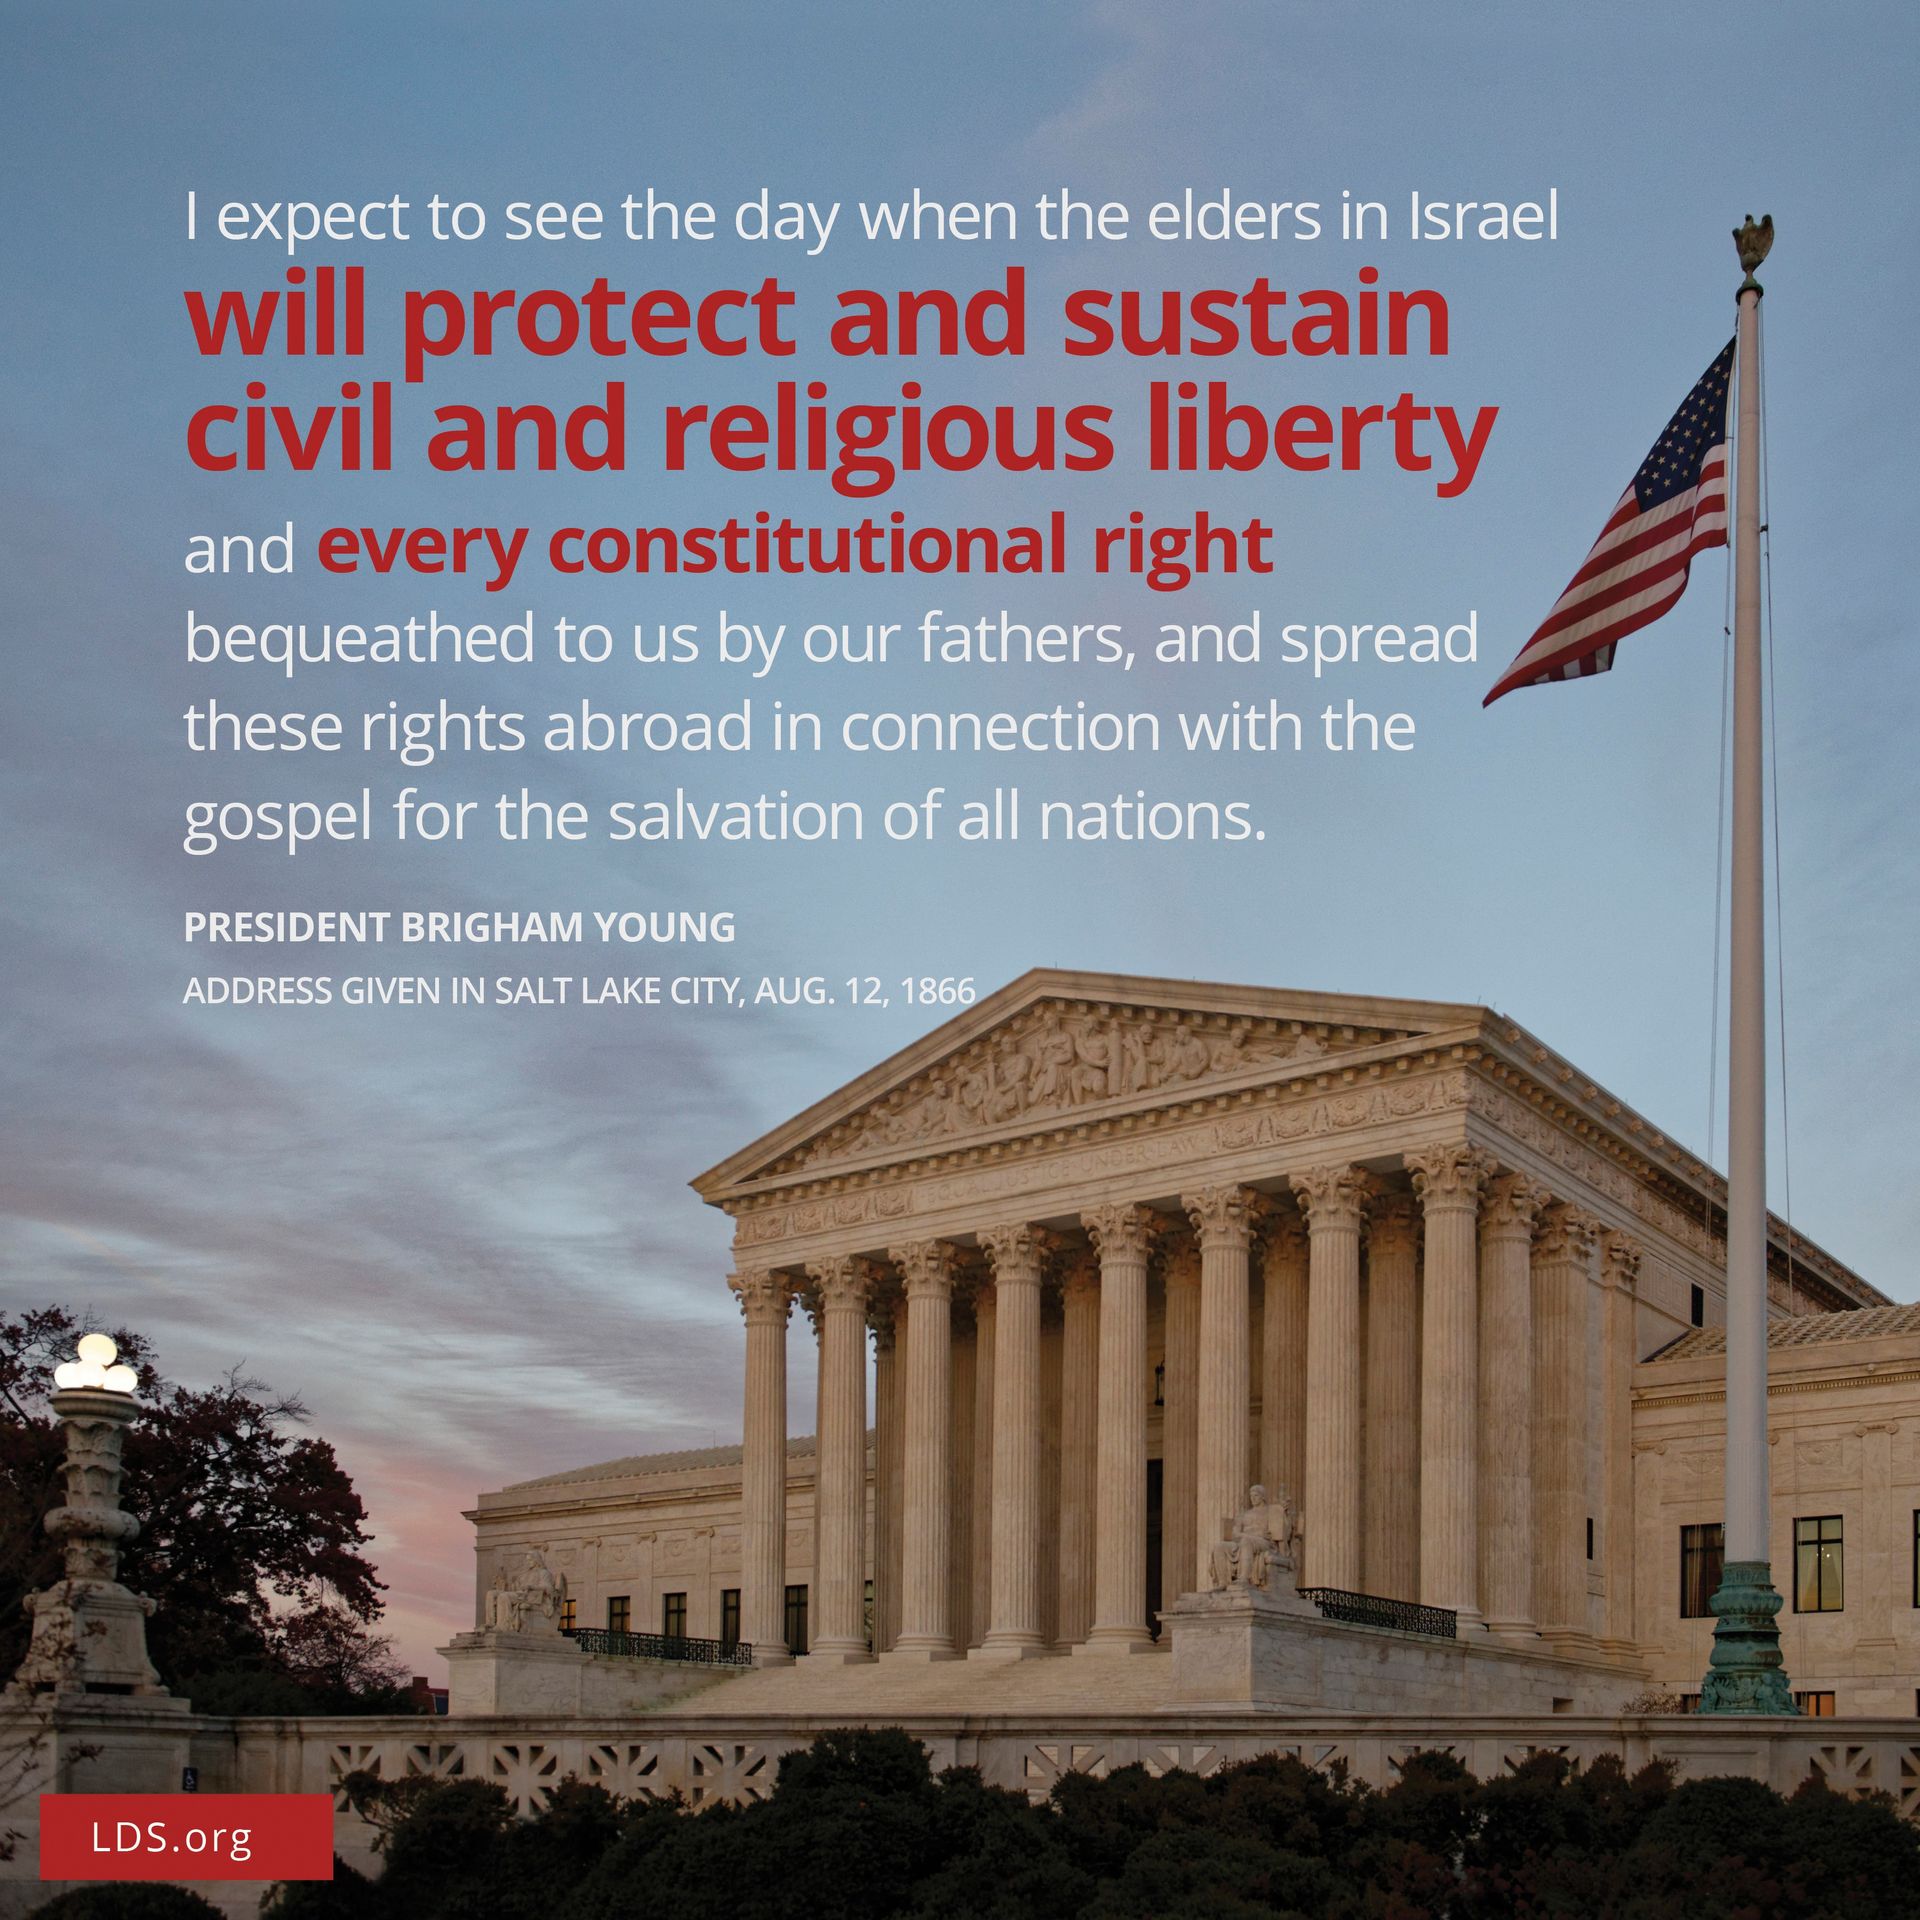 “I expect to see the day when the Elders of Israel will protect and sustain civil and religious liberty and every constitutional right bequeathed to us by our fathers, and spread those rights abroad in connection with the gospel for the salvation of all nations.”—Brigham Young, address given in Salt Lake City, Utah, on August 12, 1866